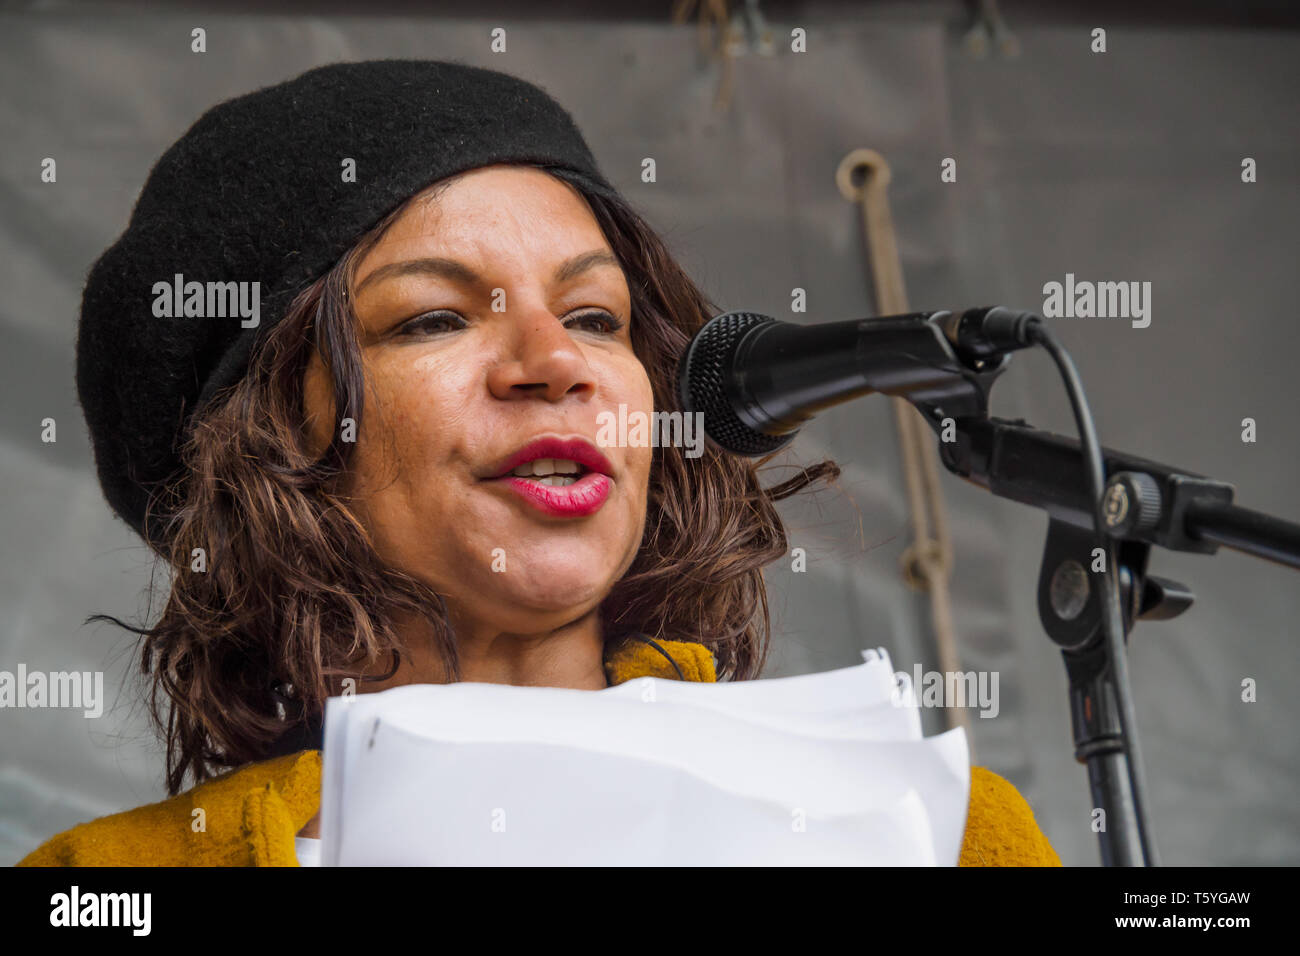 London, UK. 27th April 2019. Dorothea Jones  from The (Southall) Monitoring Group speaks at the rally after the march in Southall remembering the murders there of Gurdip Singh Chaggar and Blair Peach, calling for unity against racism. Chaggar, an 18 year old student, was murdered by racists in June 1976 and Peach was killed by a police officer when police rioted against protesters and the local community opposing a National Front rally on April 23rd 1979, 40 years ago. Credit: Peter Marshall/Alamy Live News Stock Photo